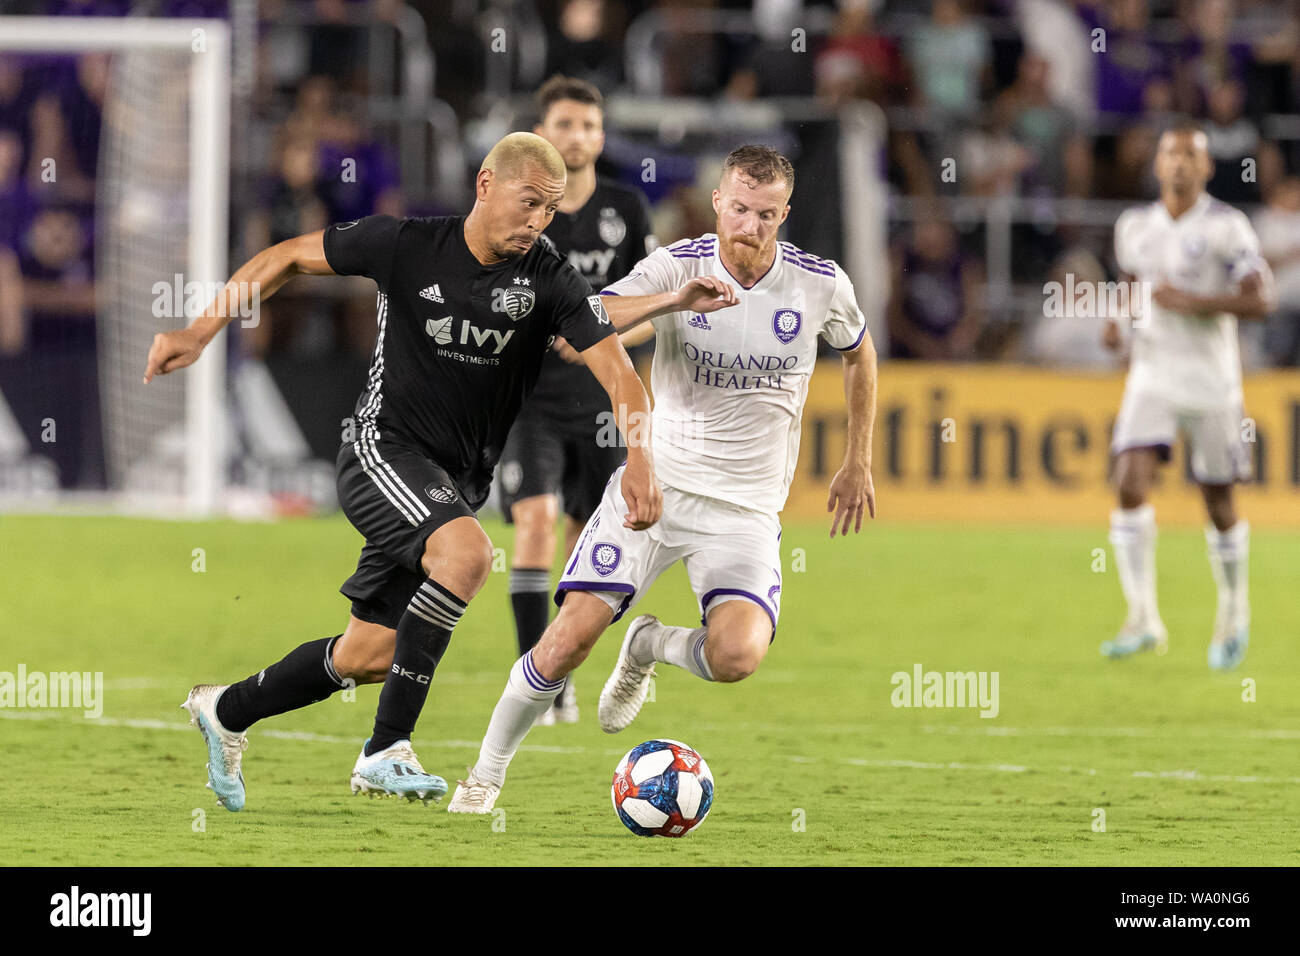 Orlando, Florida, U.S.A. 14th Aug, 2019. Sporting Kansas City midfielder ROGER ESPINOZA (17) competes for the ball against Orlando City midfielder ORIOL ROSWELL (20) during the MLS game at Exploria Stadium in Orlando, Florida. Credit: Cory Knowlton/ZUMA Wire/Alamy Live News Stock Photo